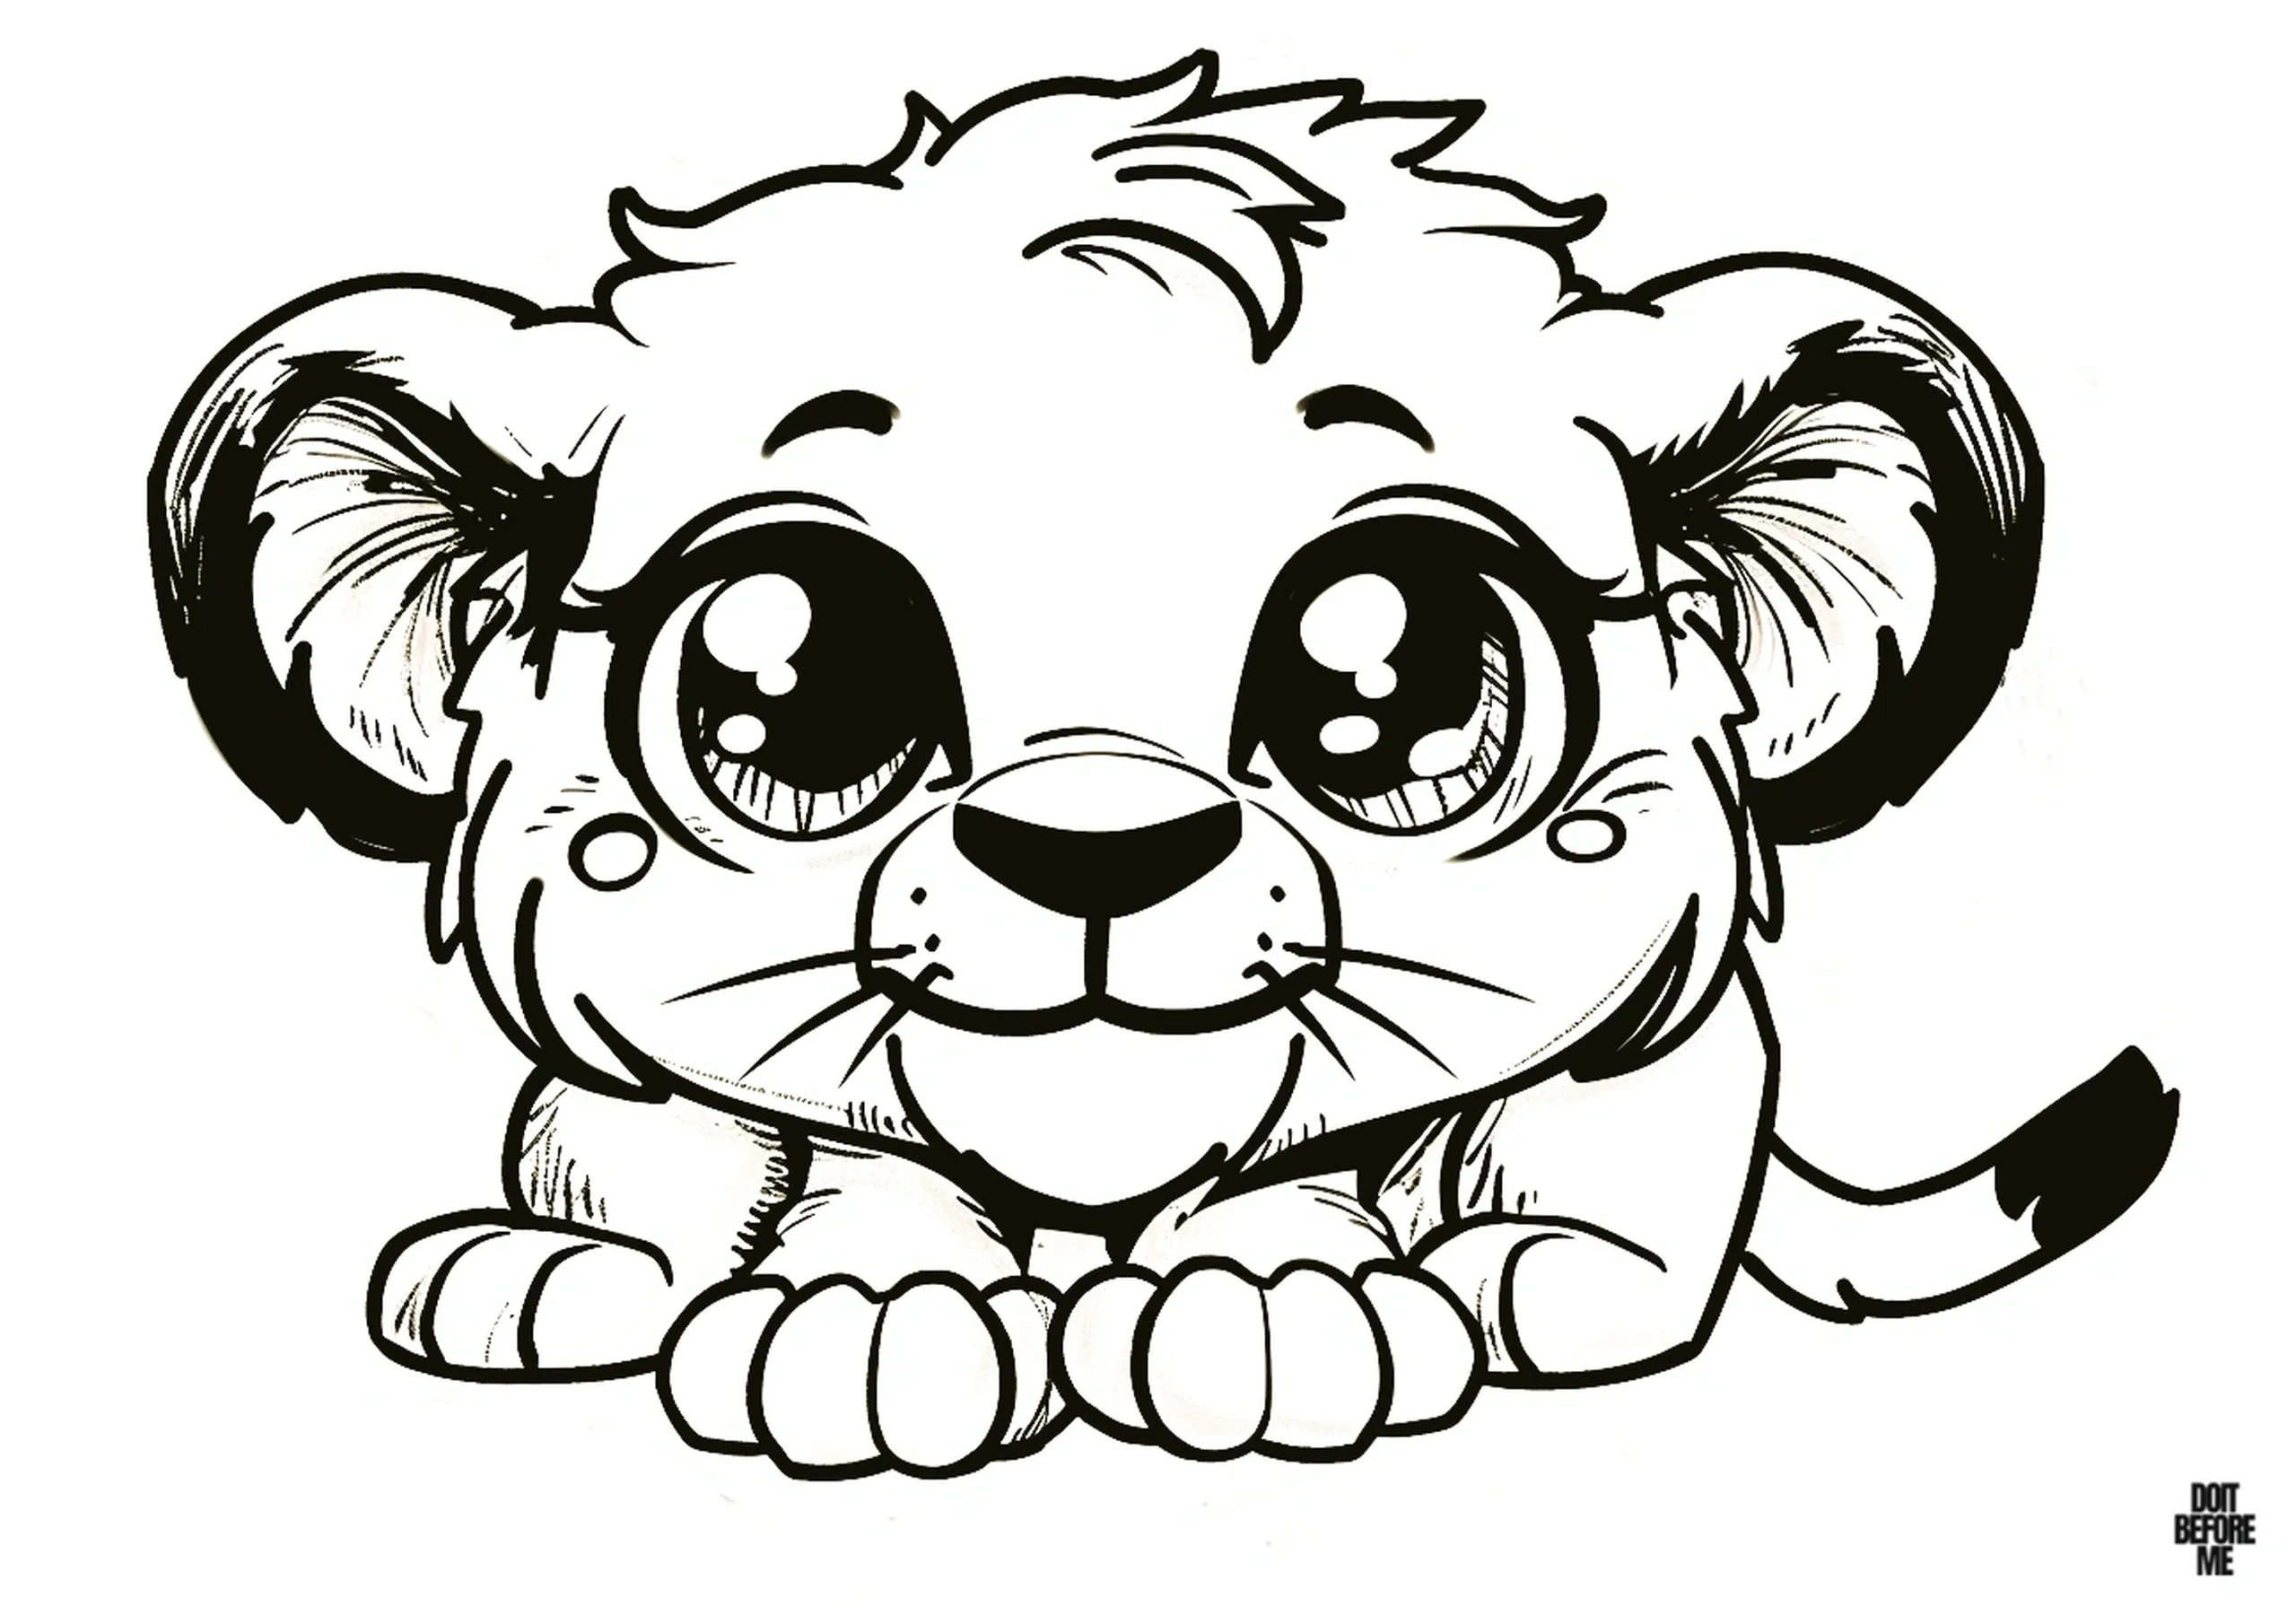 Printable coloring page for toddlers featuring a baby lion cub with big kawaii eyes and a cute lion face.